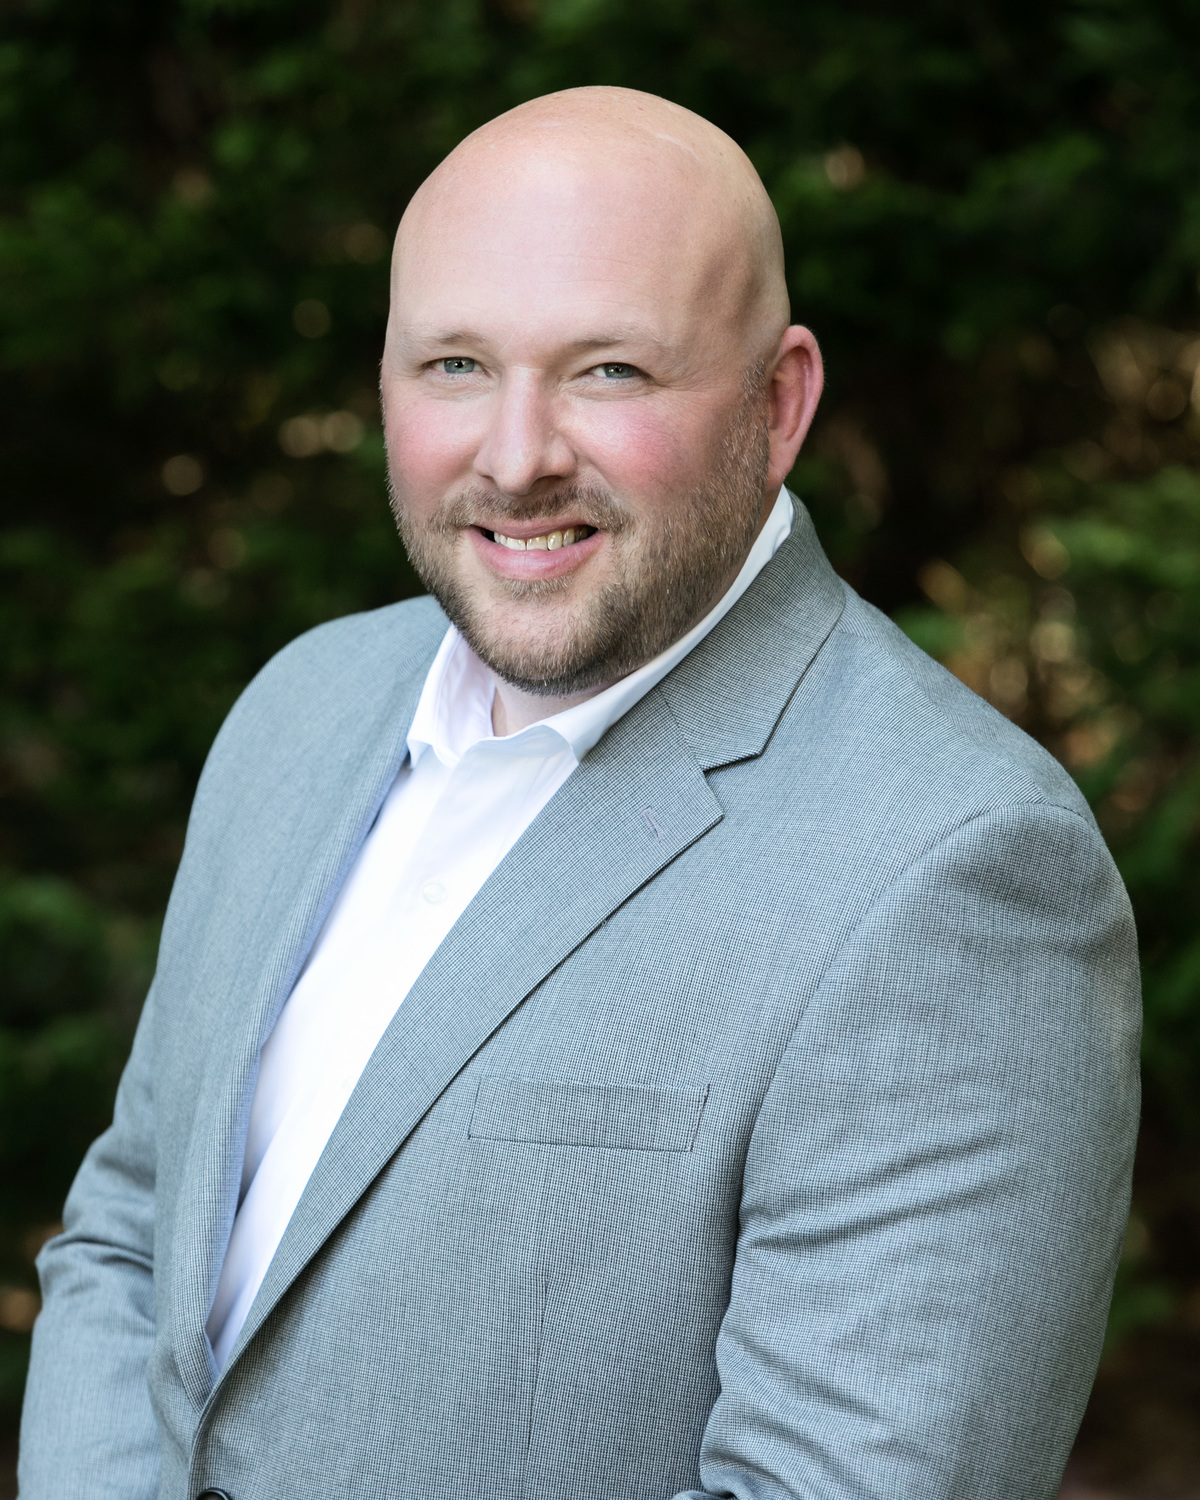 <span style="font-weight: bold;">Christopher Boone - Realtor/Listing Specialist/Team Lead</span>